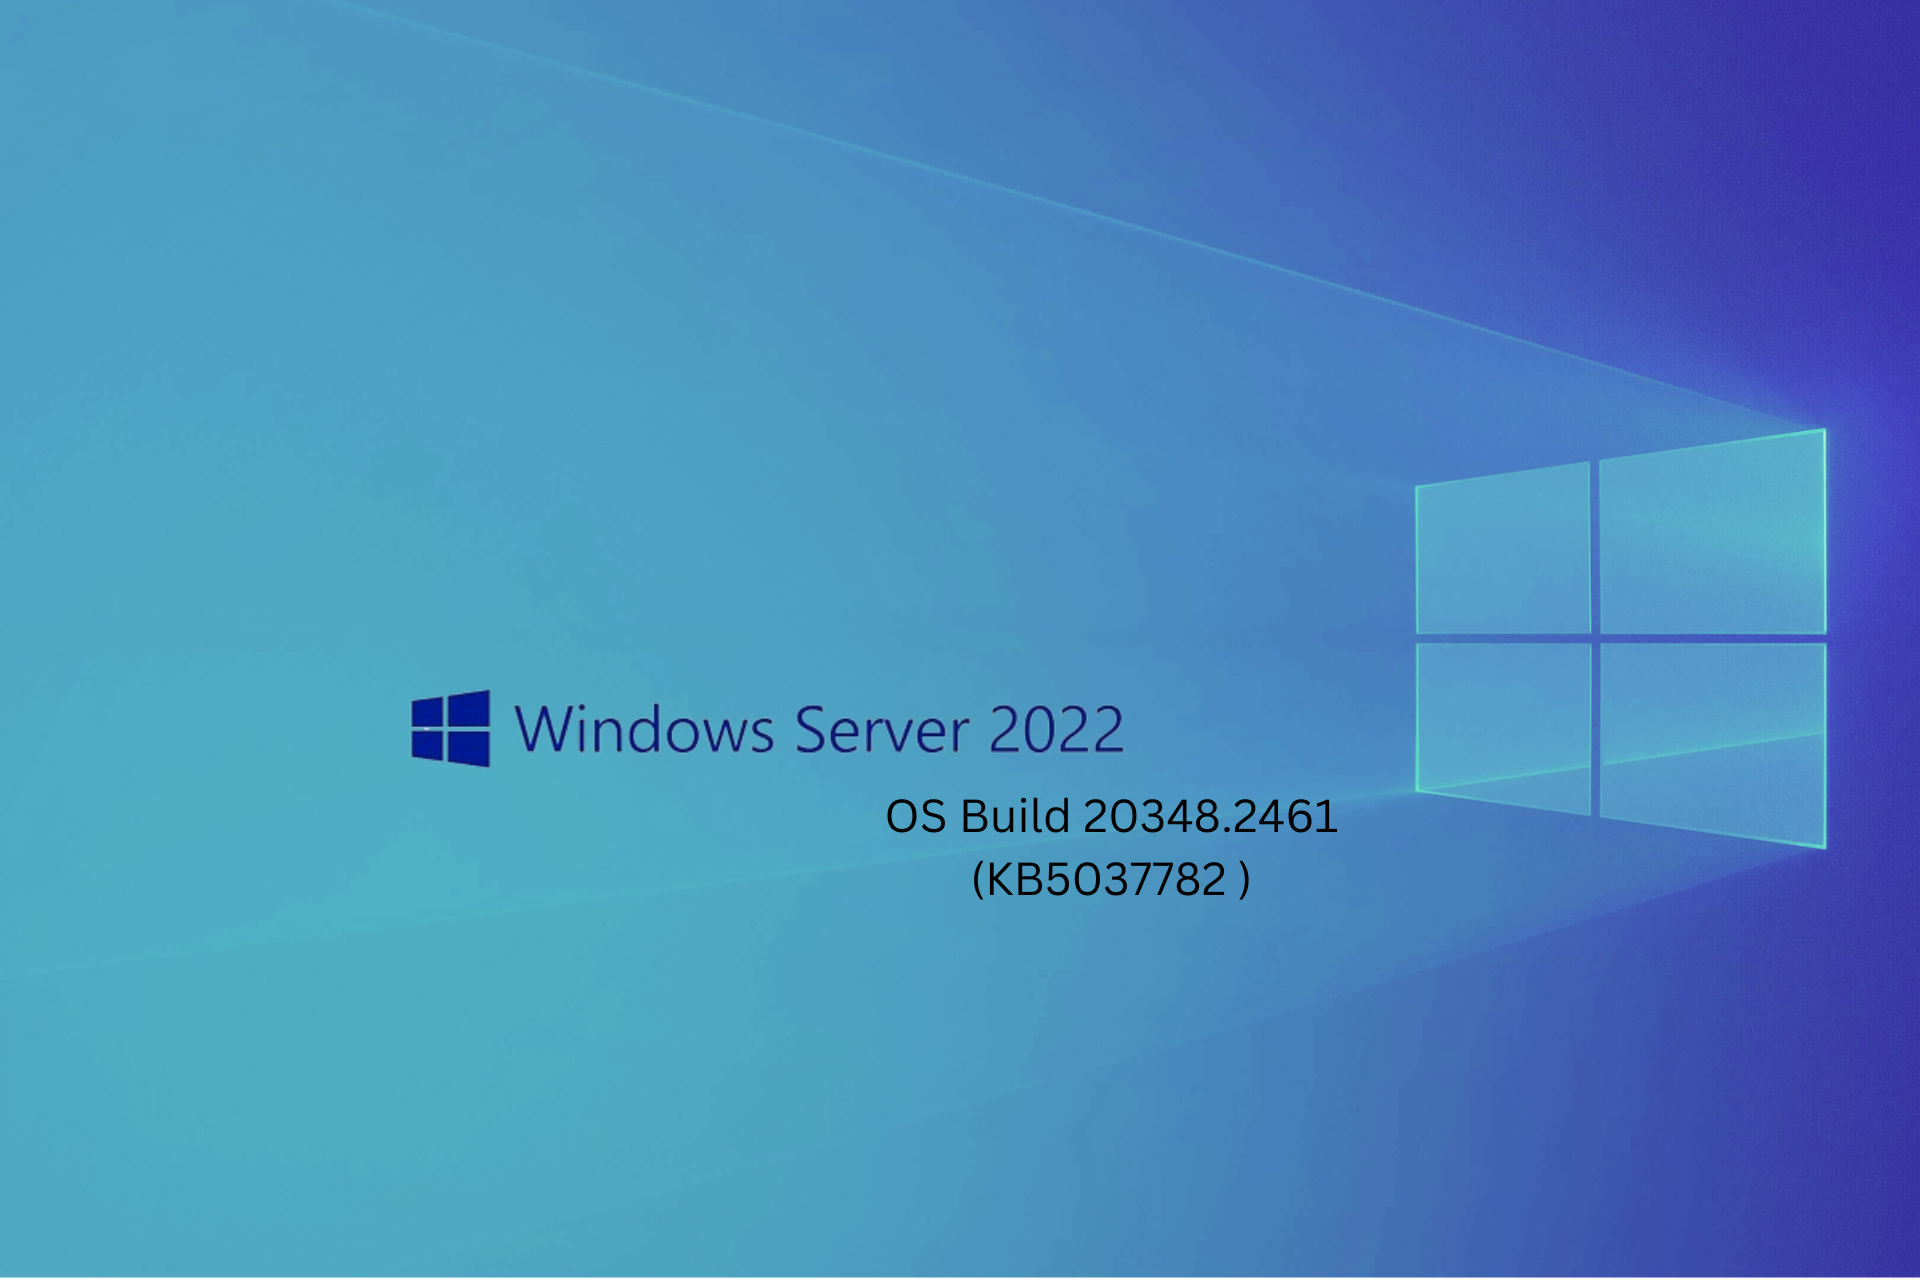 Windows Server KB5037782 update brings quality improvements and fixes the NTLM bug